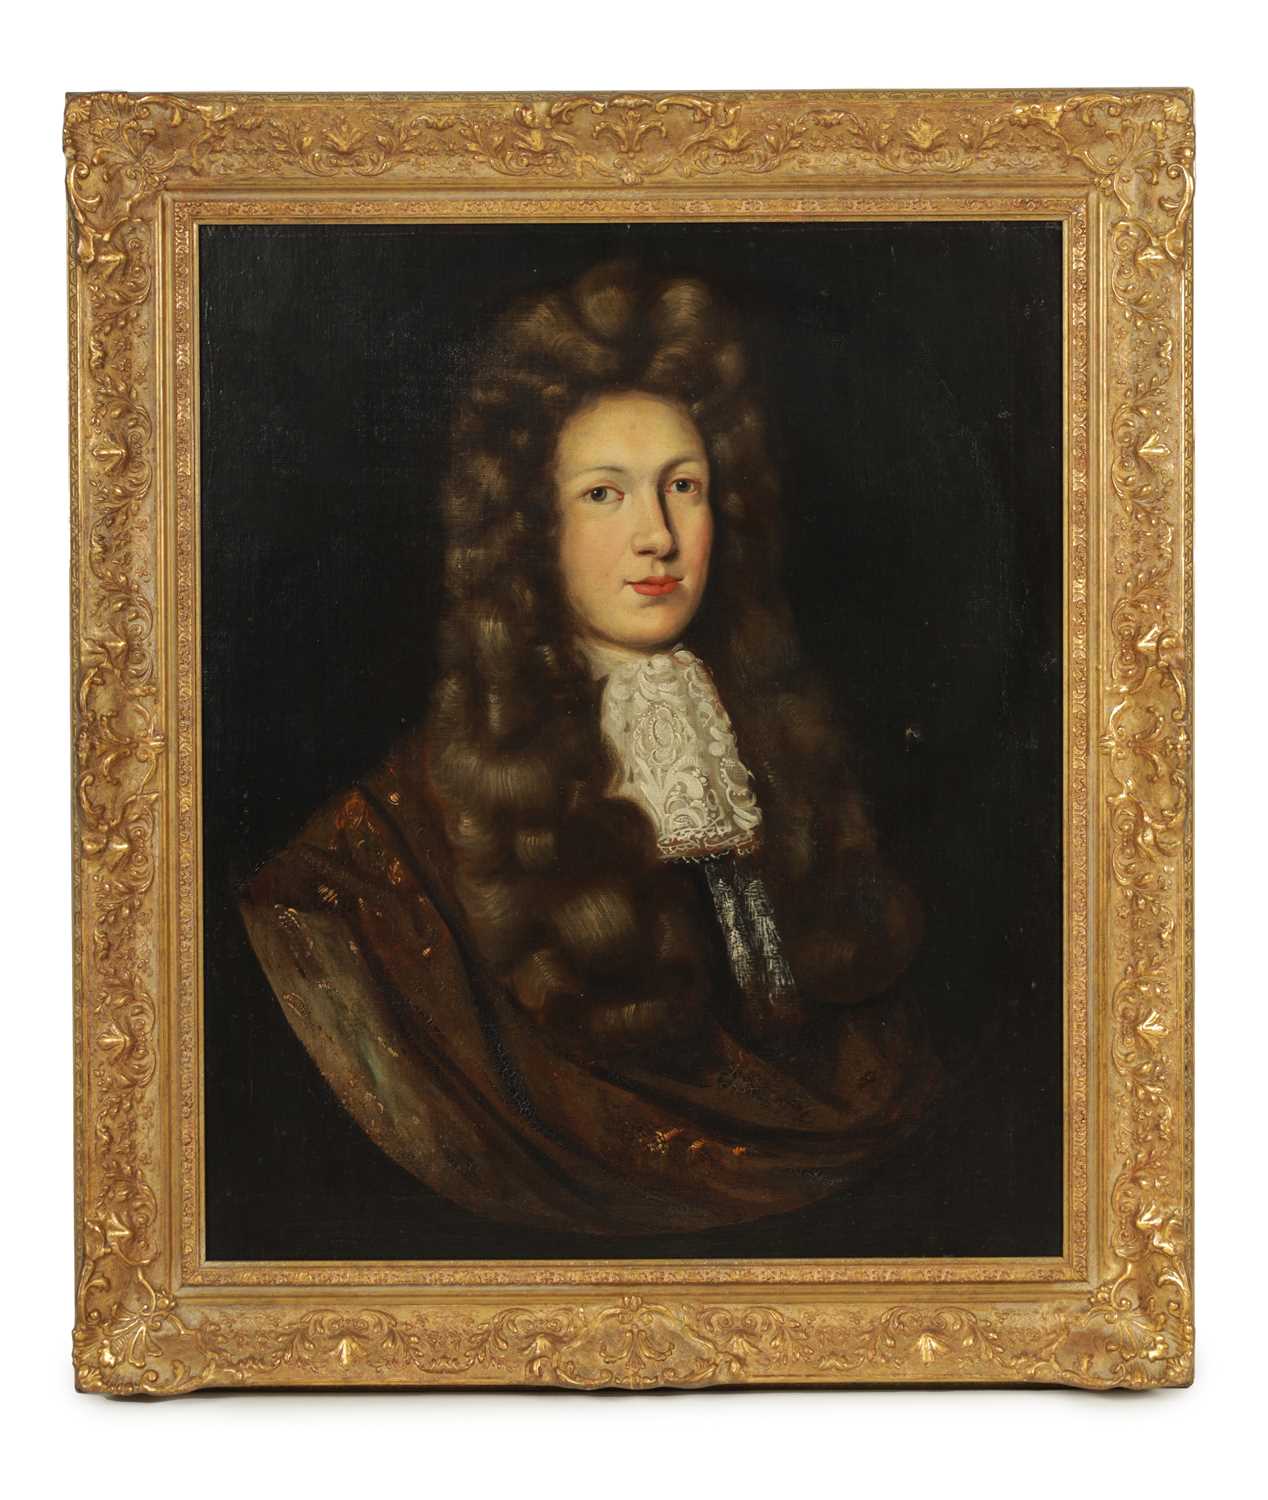 Lot 833 - A 17TH/18TH CENTURY OIL ON CANVAS